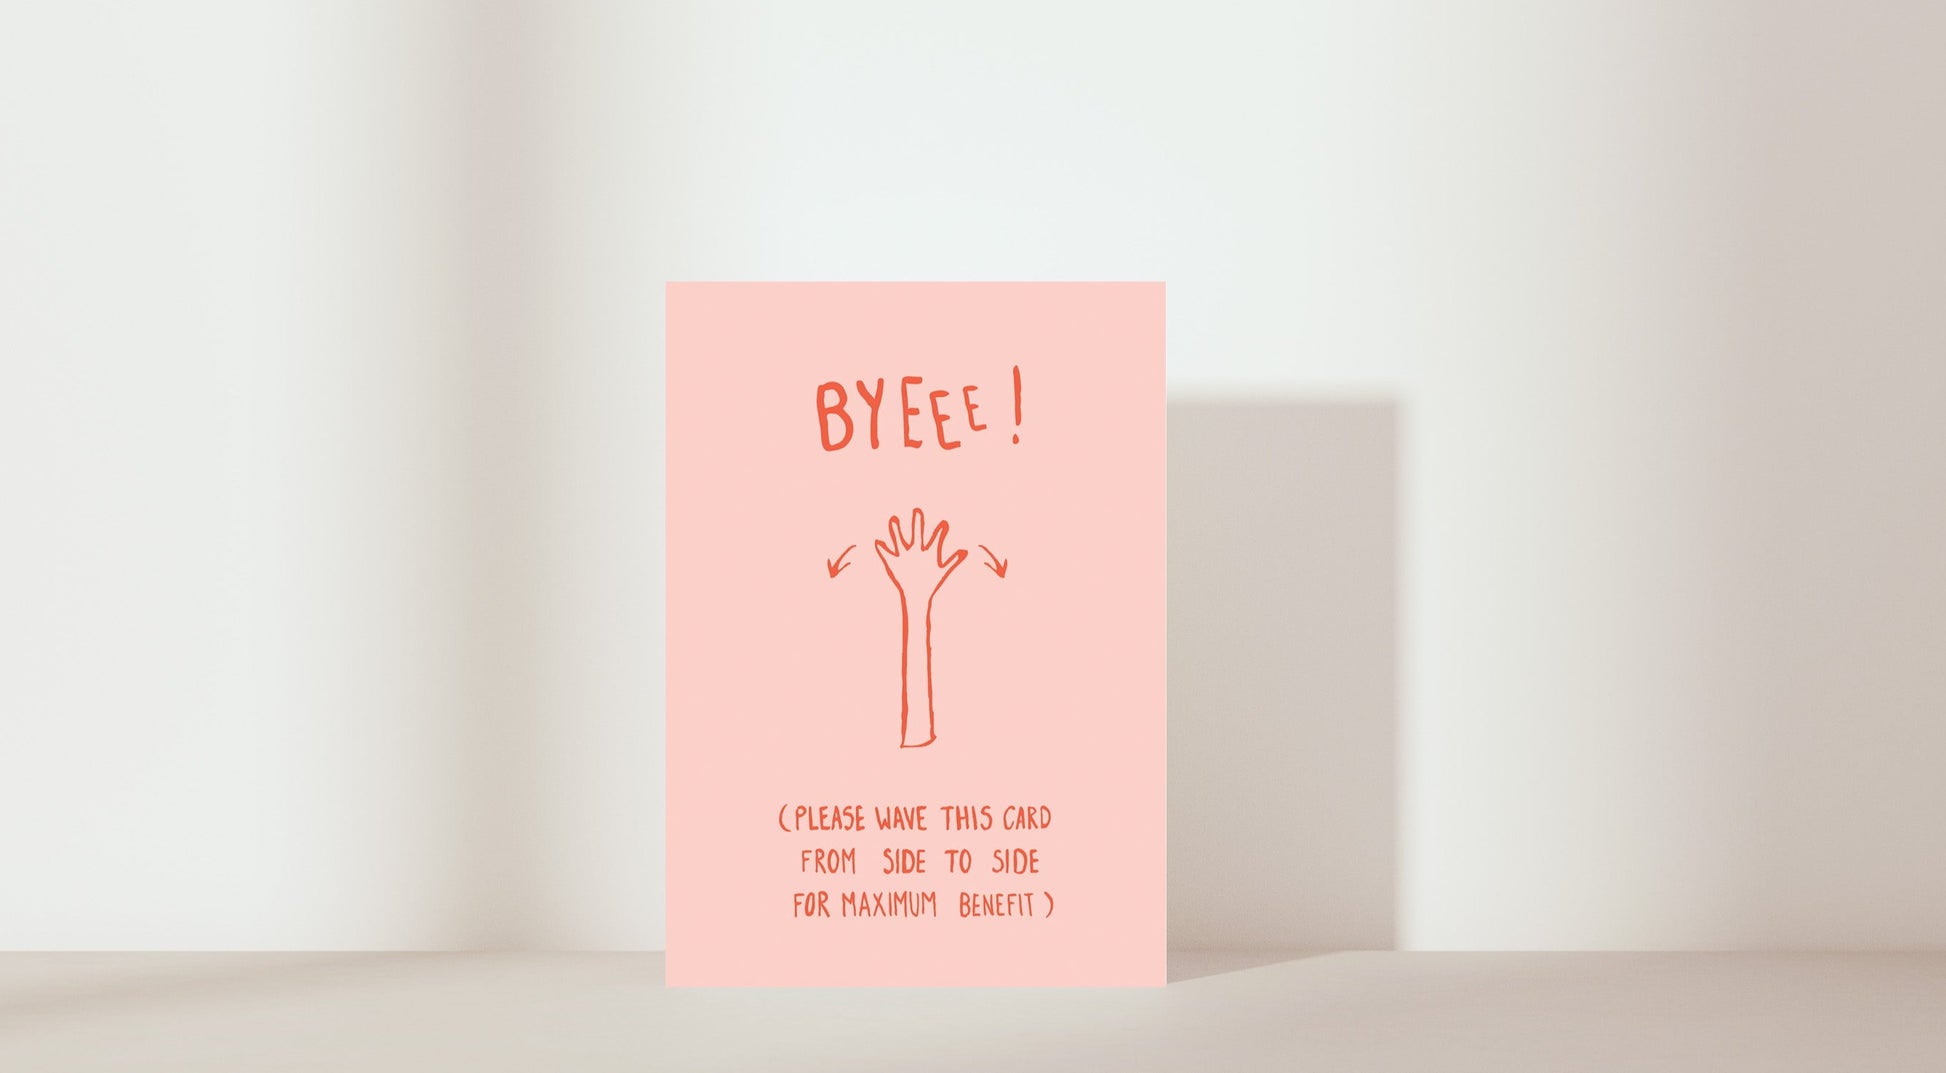 'Byee! (please wave this card from side to side for maximum benefit)' Card. Colour: red and pink